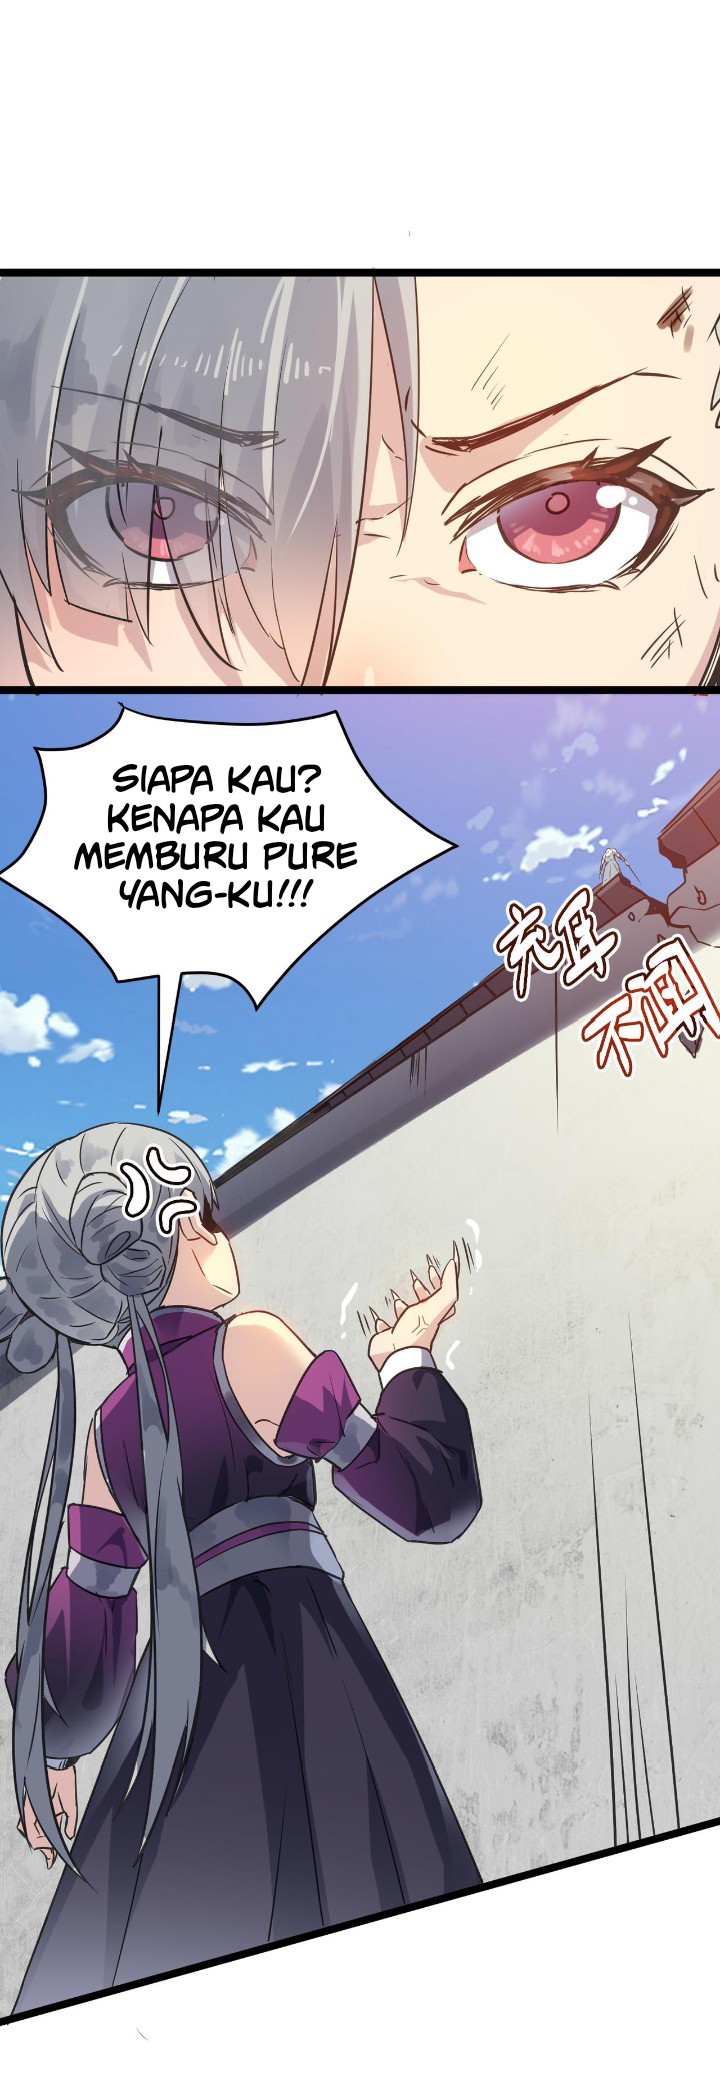 Dilarang COPAS - situs resmi www.mangacanblog.com - Komik building the strongest shaolin temple in another world 046 - chapter 46 47 Indonesia building the strongest shaolin temple in another world 046 - chapter 46 Terbaru 5|Baca Manga Komik Indonesia|Mangacan